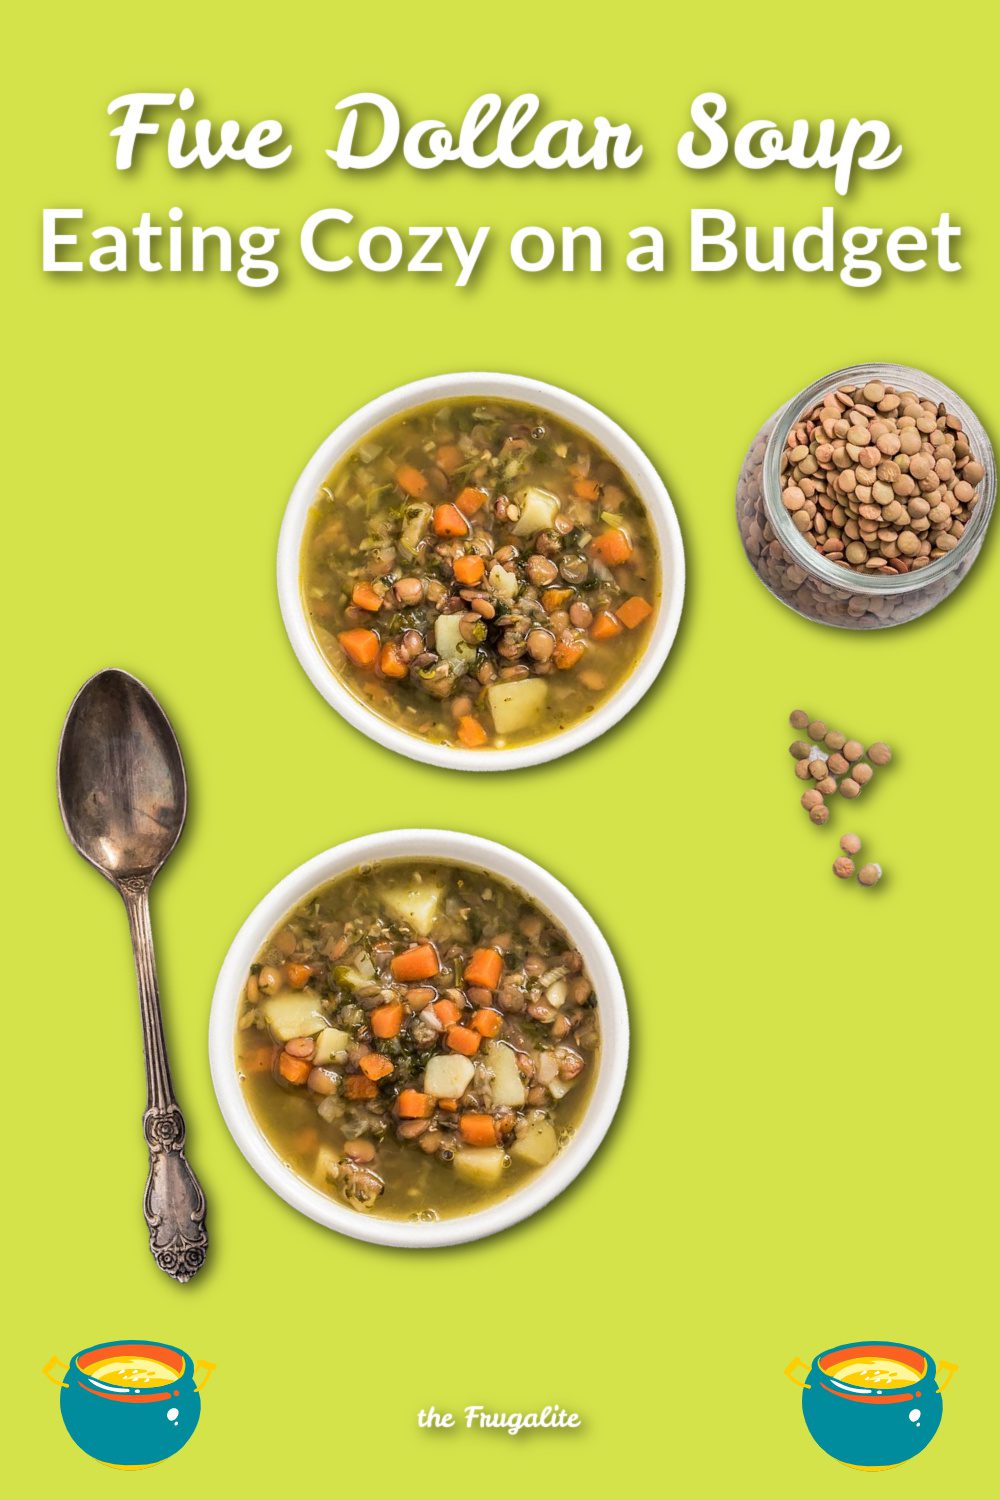 Five-Dollar Soup: Eating Cozy on a Budget